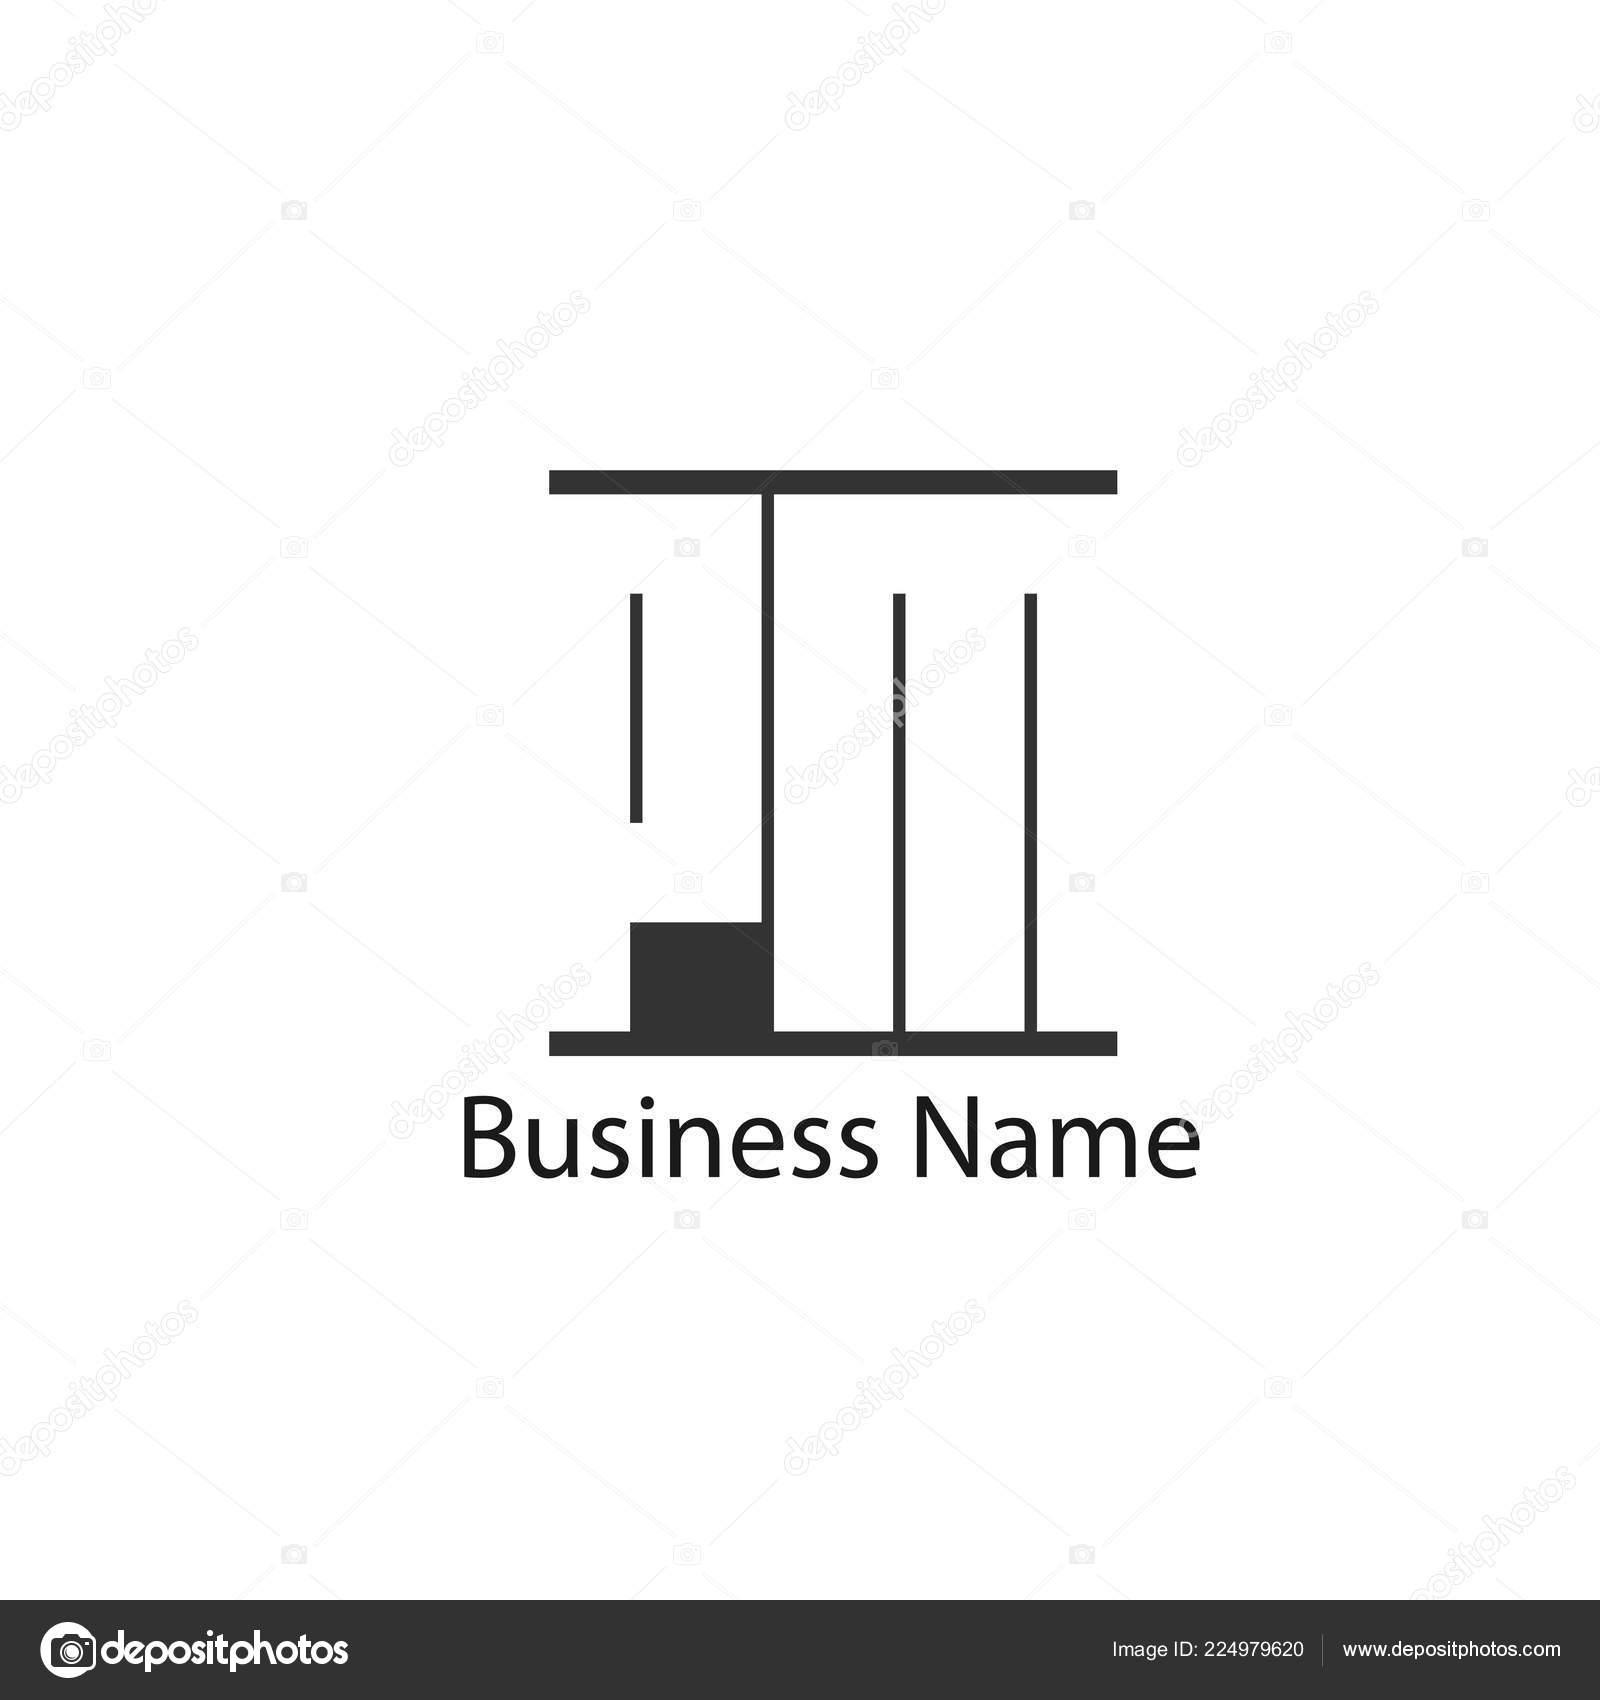 Initial Letter PM Logo Template Design